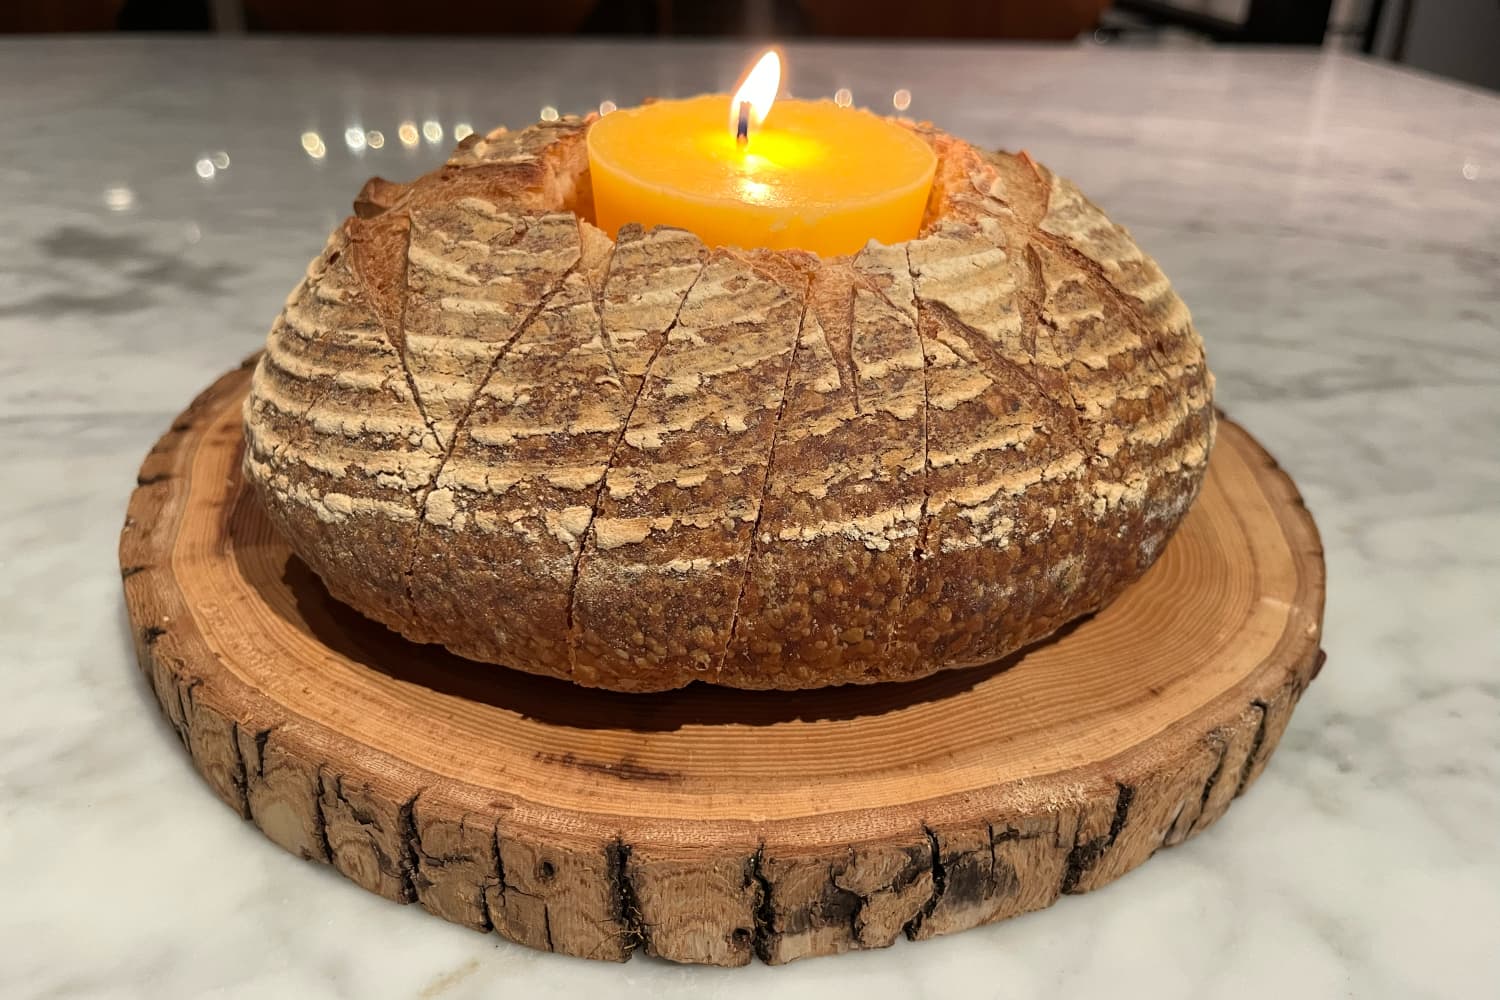 I Tried the Viral “Butter Candle,” and It's My New Favorite Party Trick